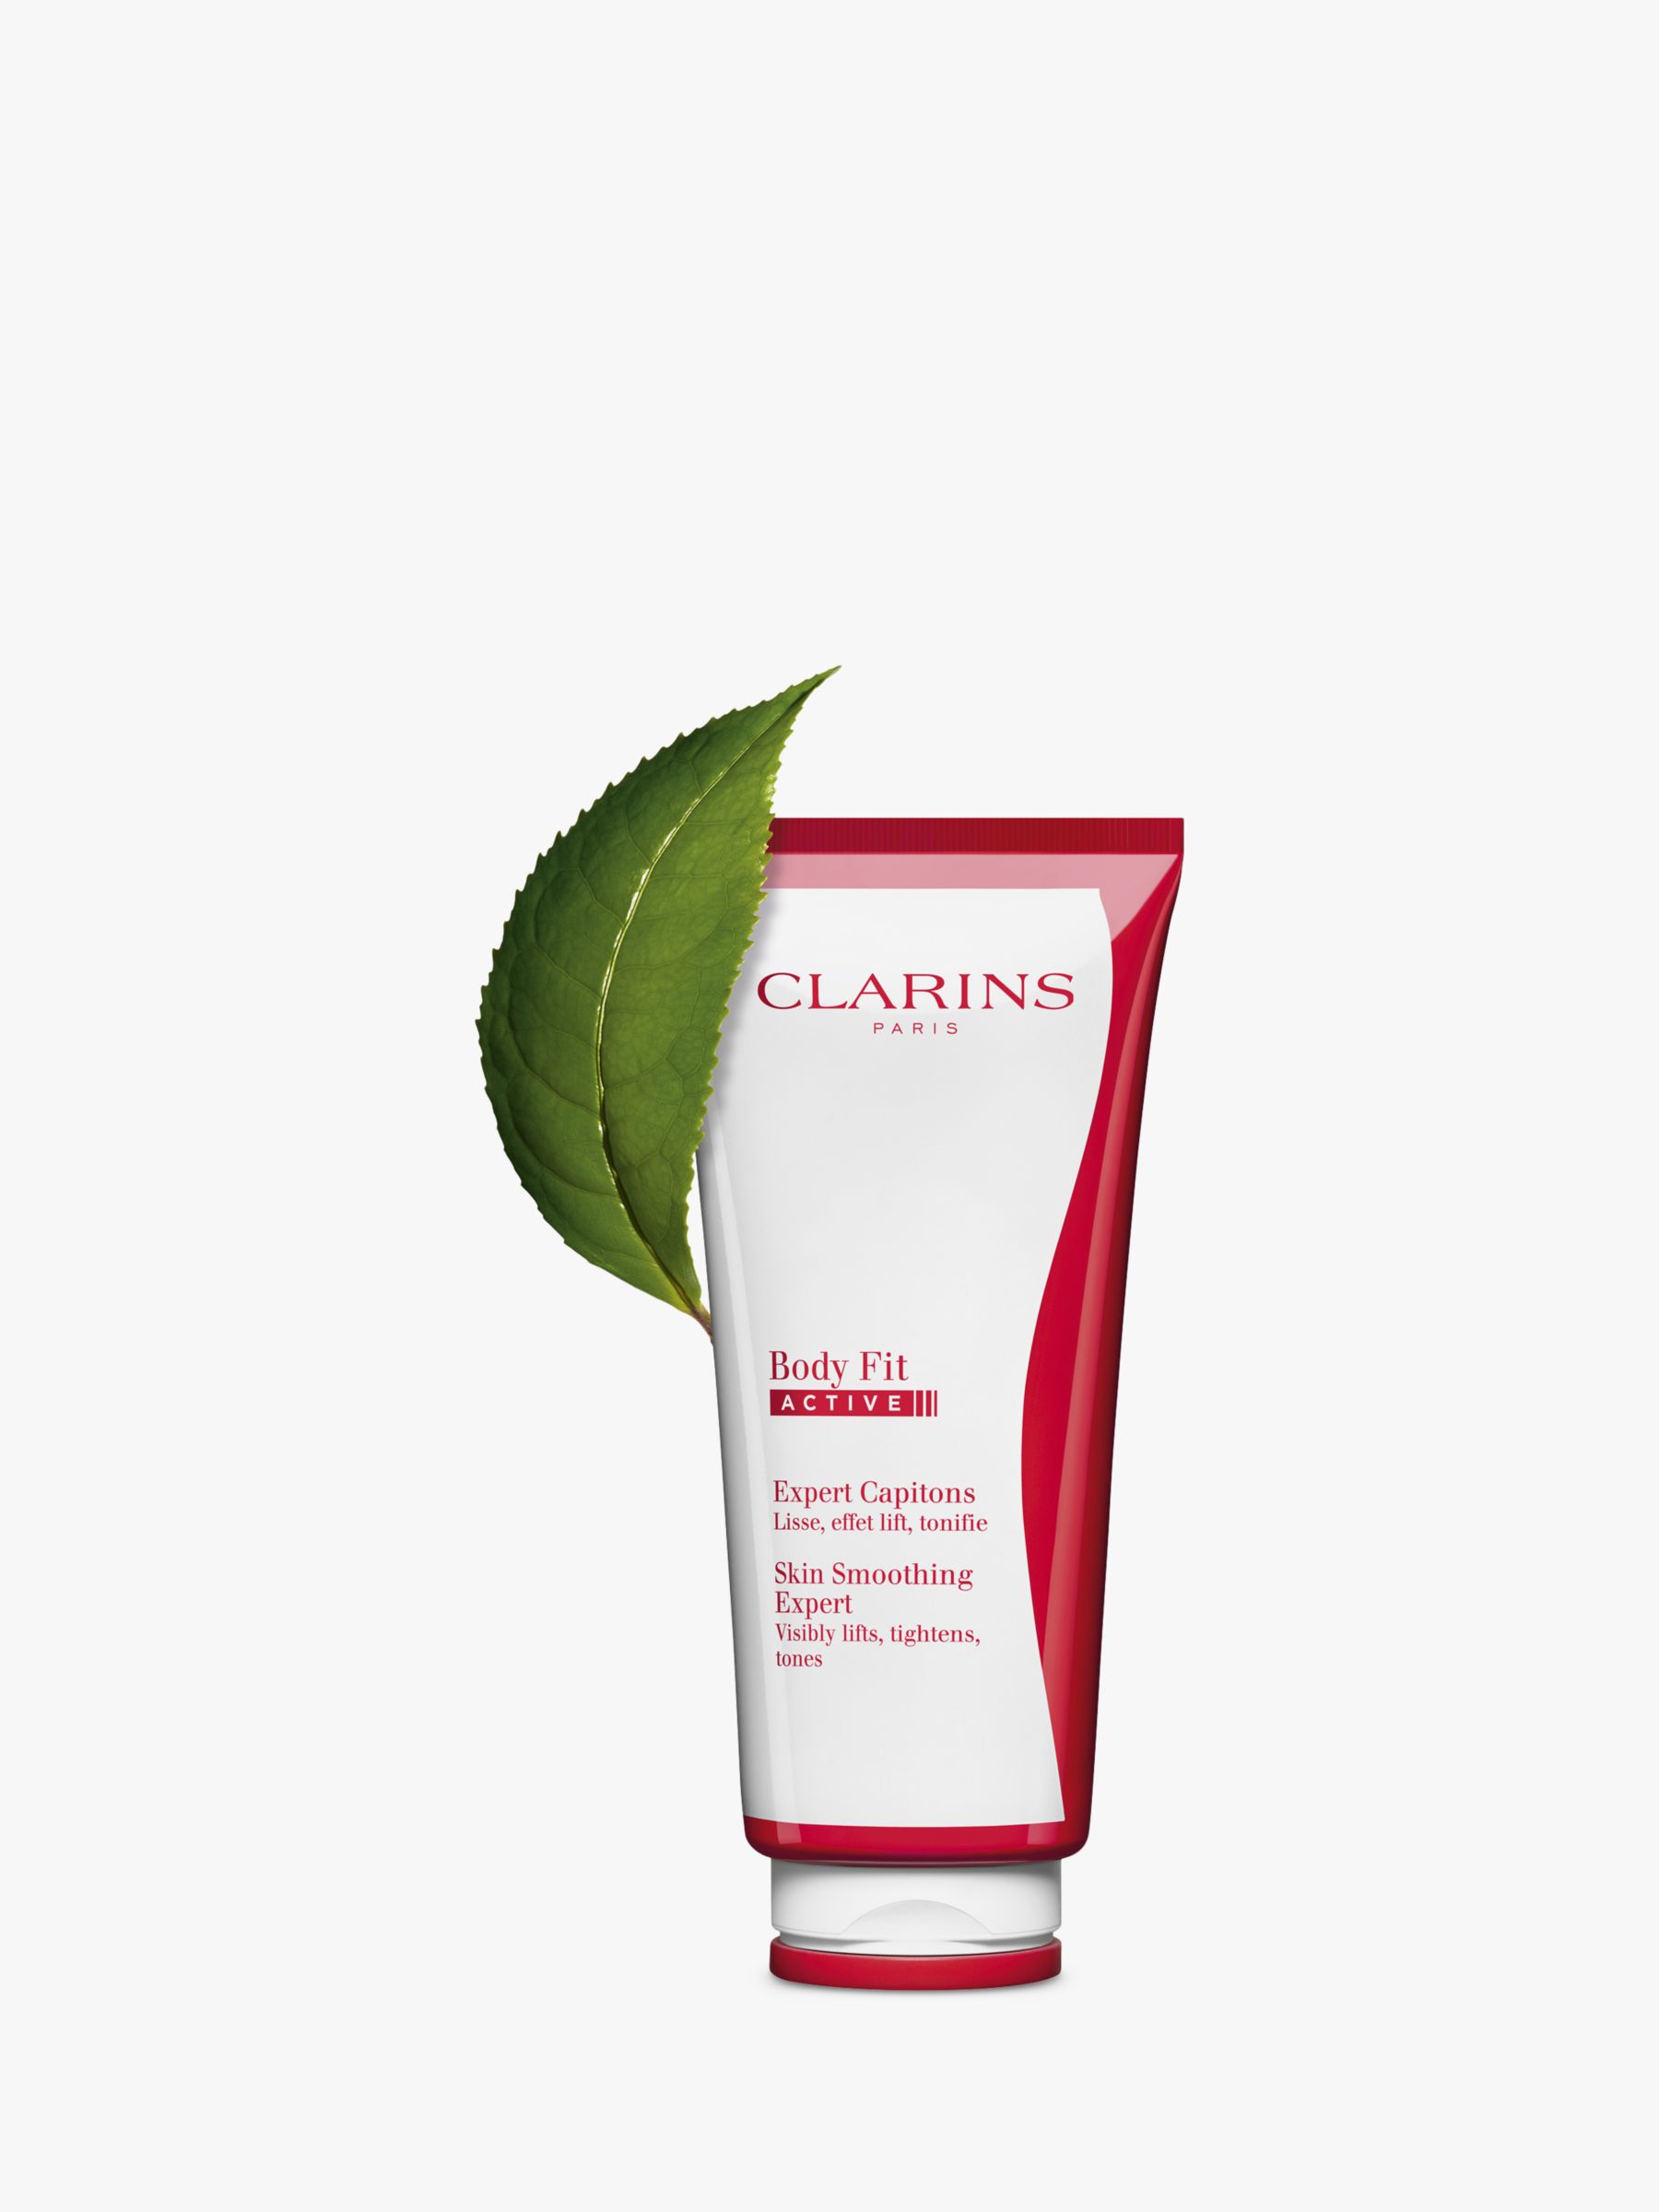 Clarins Body Fit Active Skin Smoothing Expert, 200ml 2